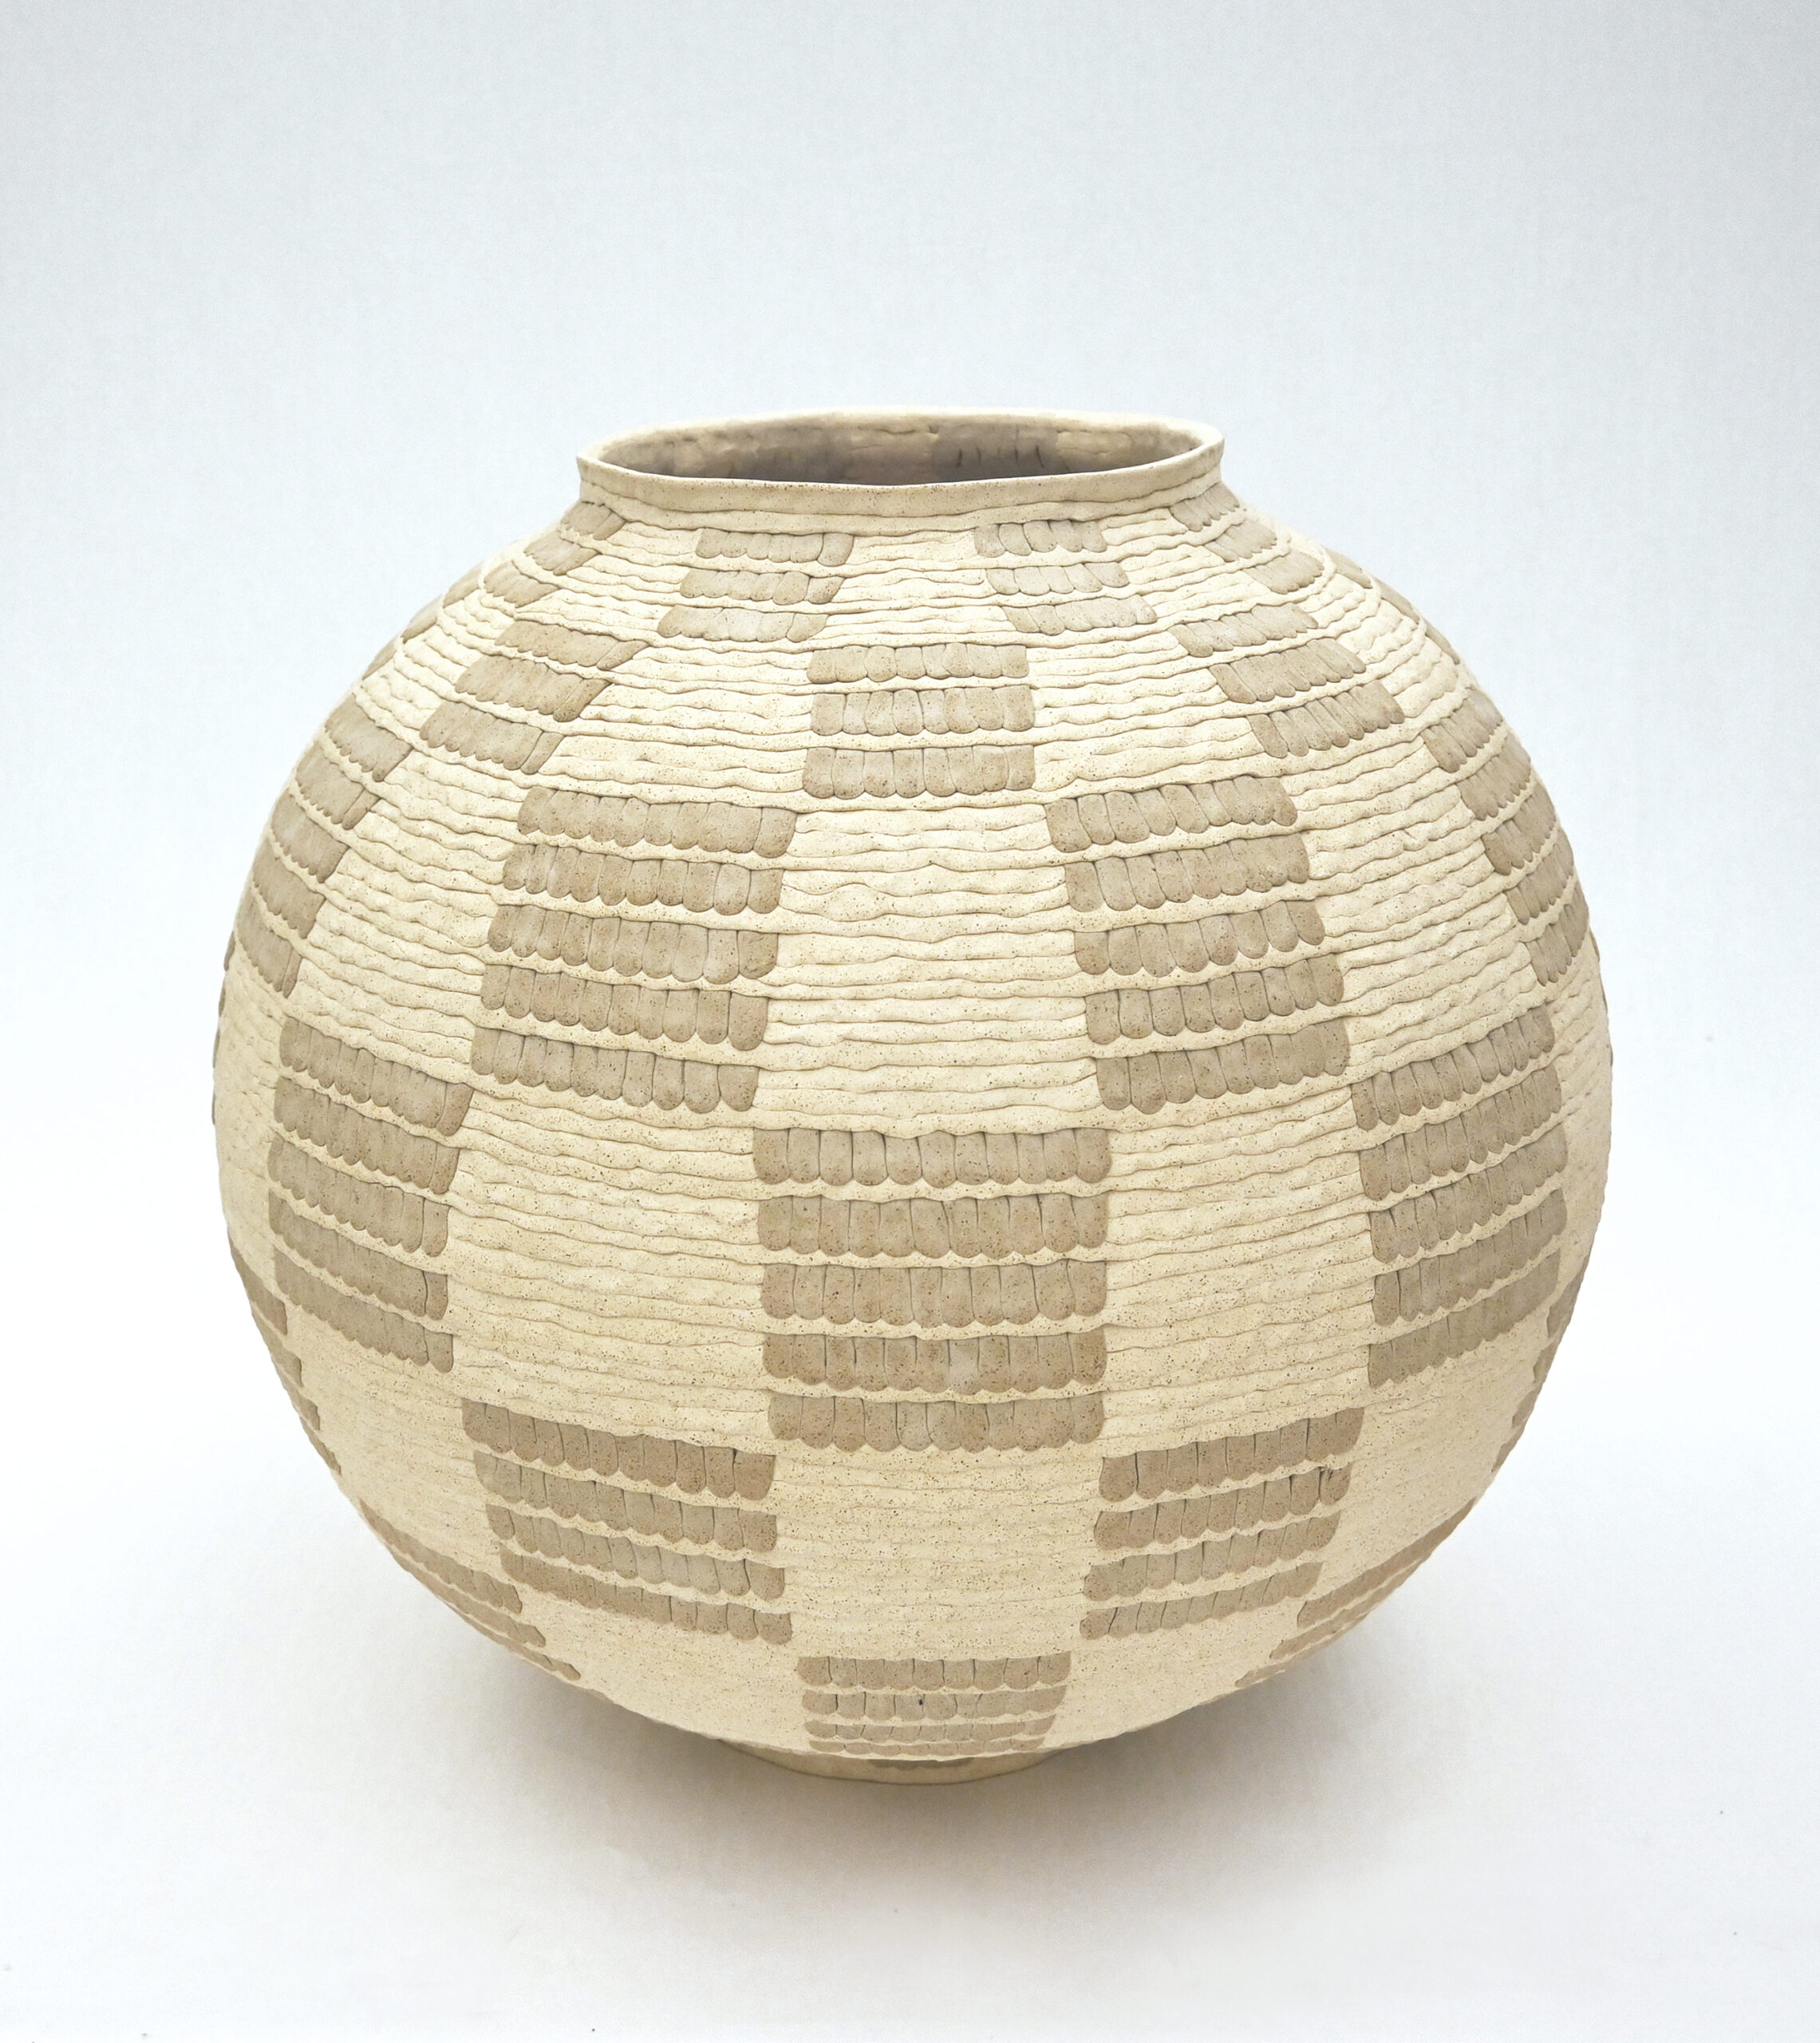 
							

									YoonJee Kwak									Patterned Memories: Moonjar-inspired series vessel I 2024									Hand-built stoneware, colored stoneware<br />
20 x 20 1/2 x 20 1/2 inches									


							